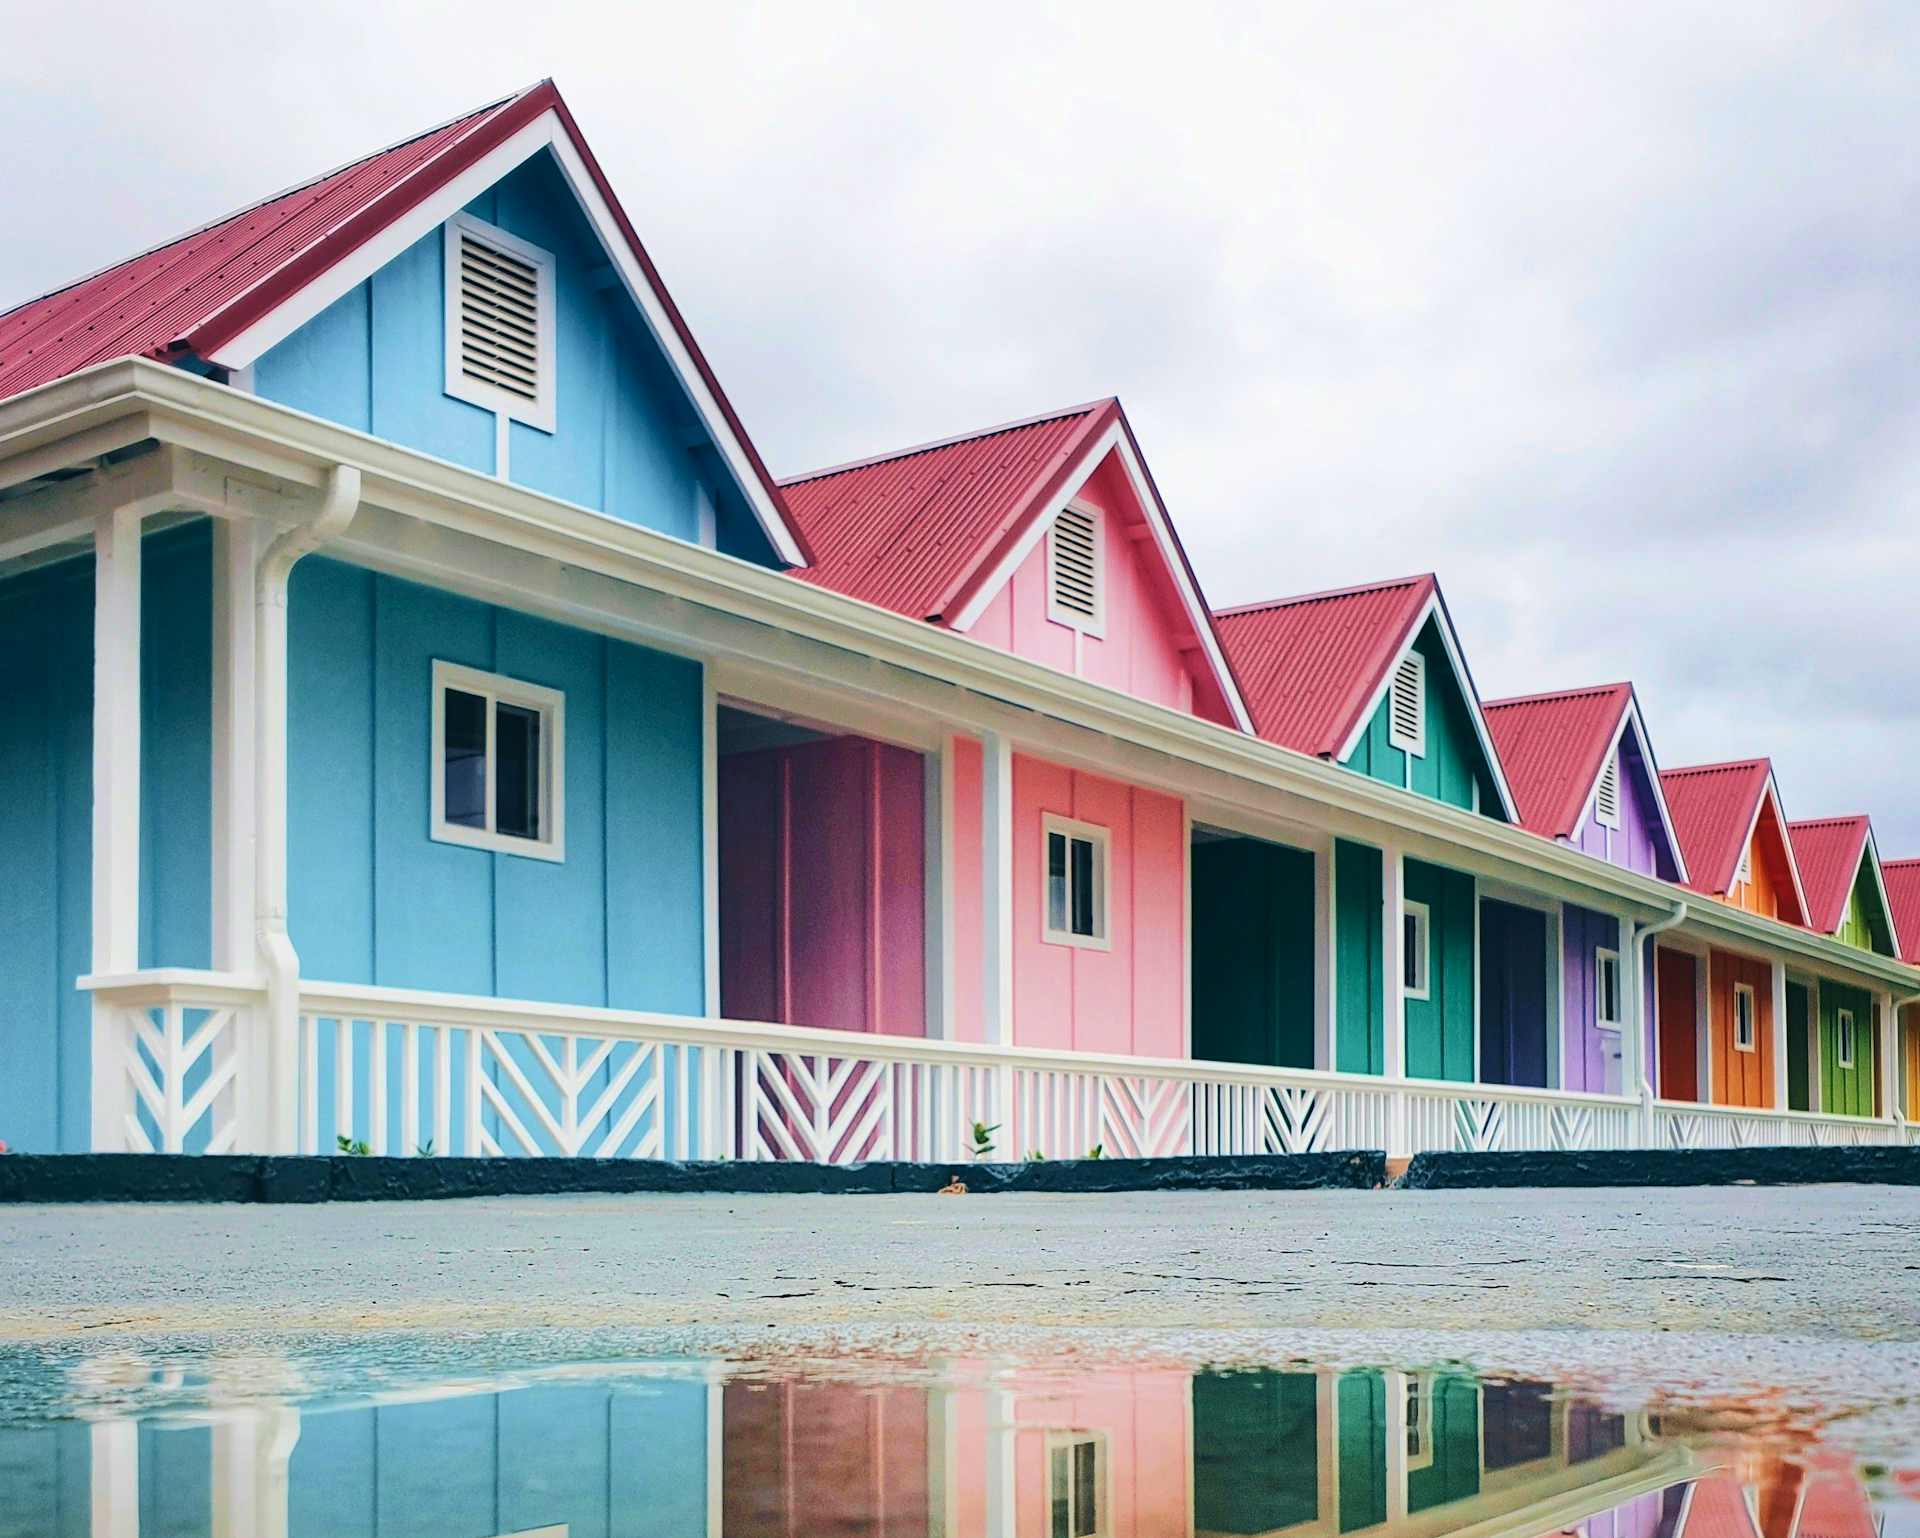 There are 7 small houses of different bright colours.